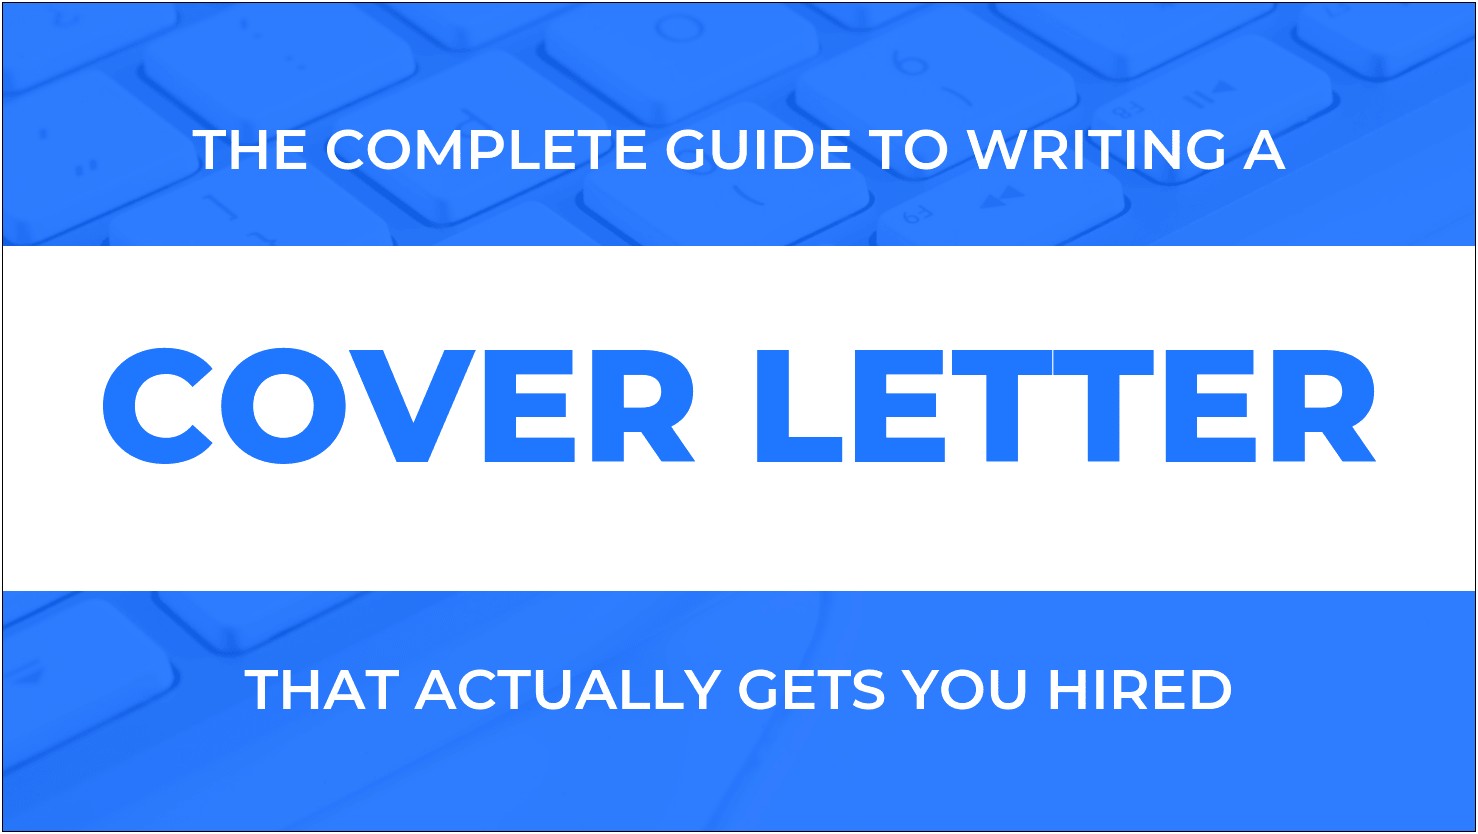 Best Fonts For Resume And Cover Letter